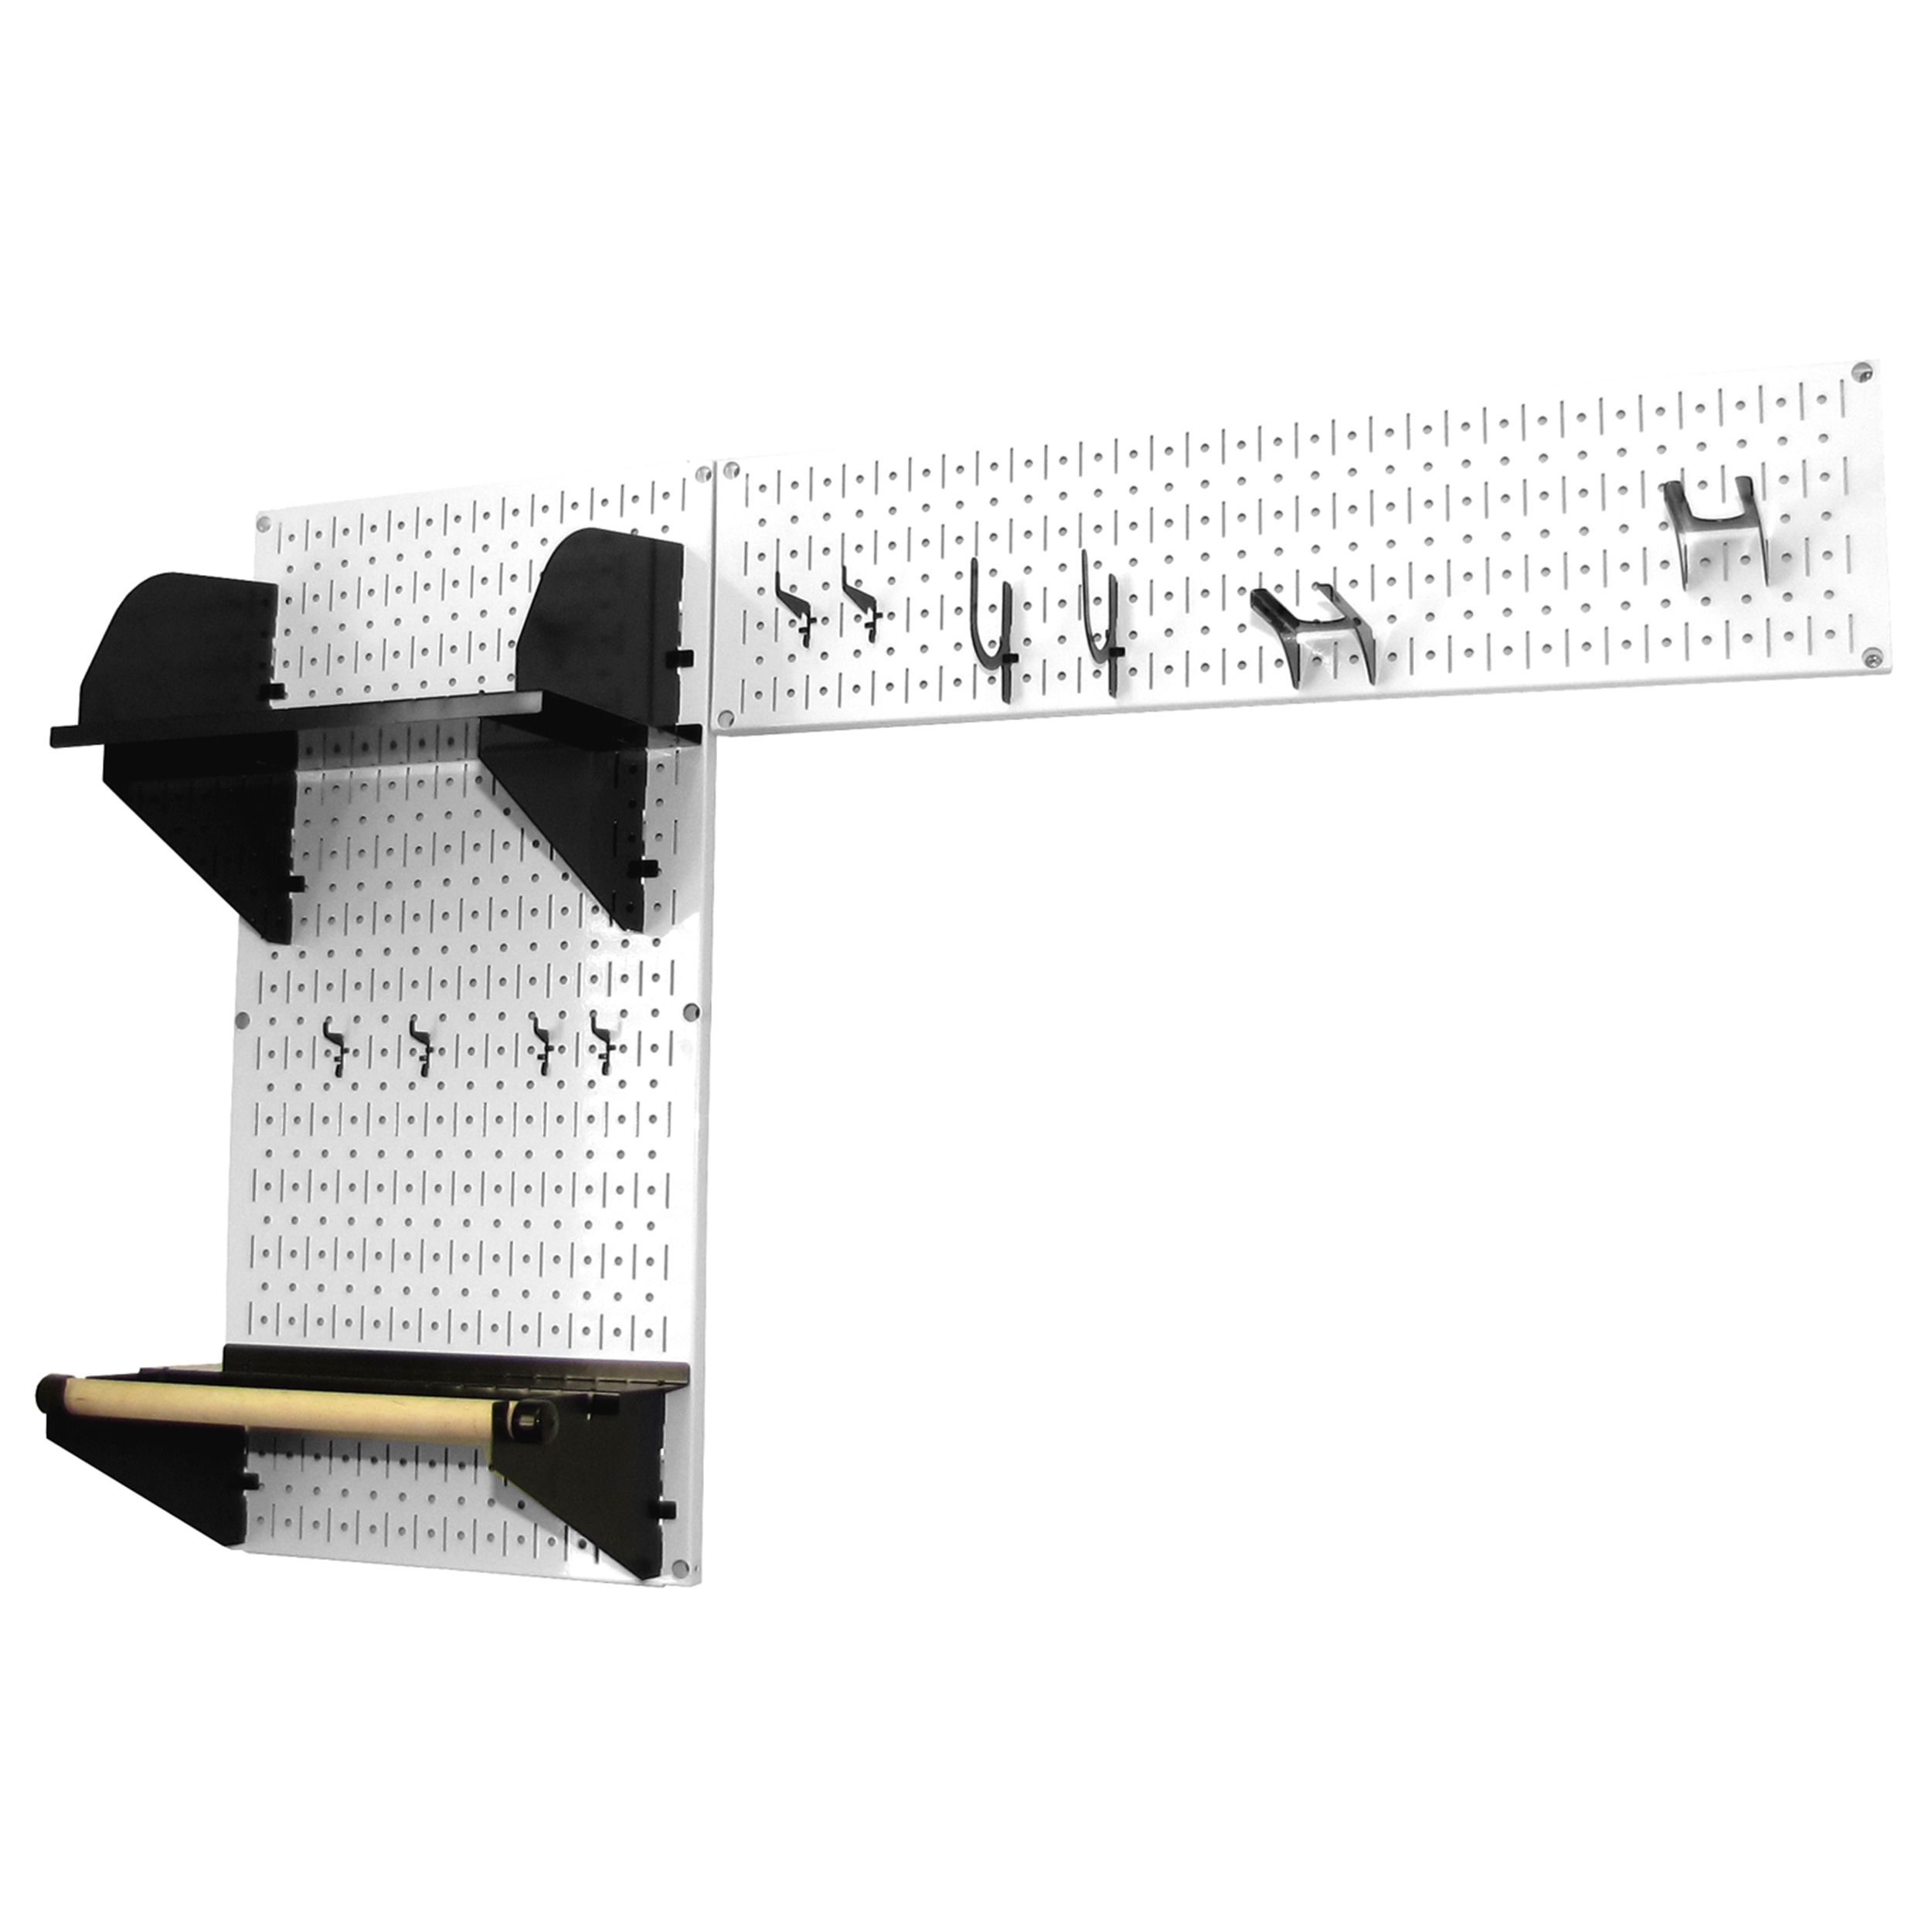 Pegboard Garden Tool Board Organizer With White Pegboard And Black Accessories